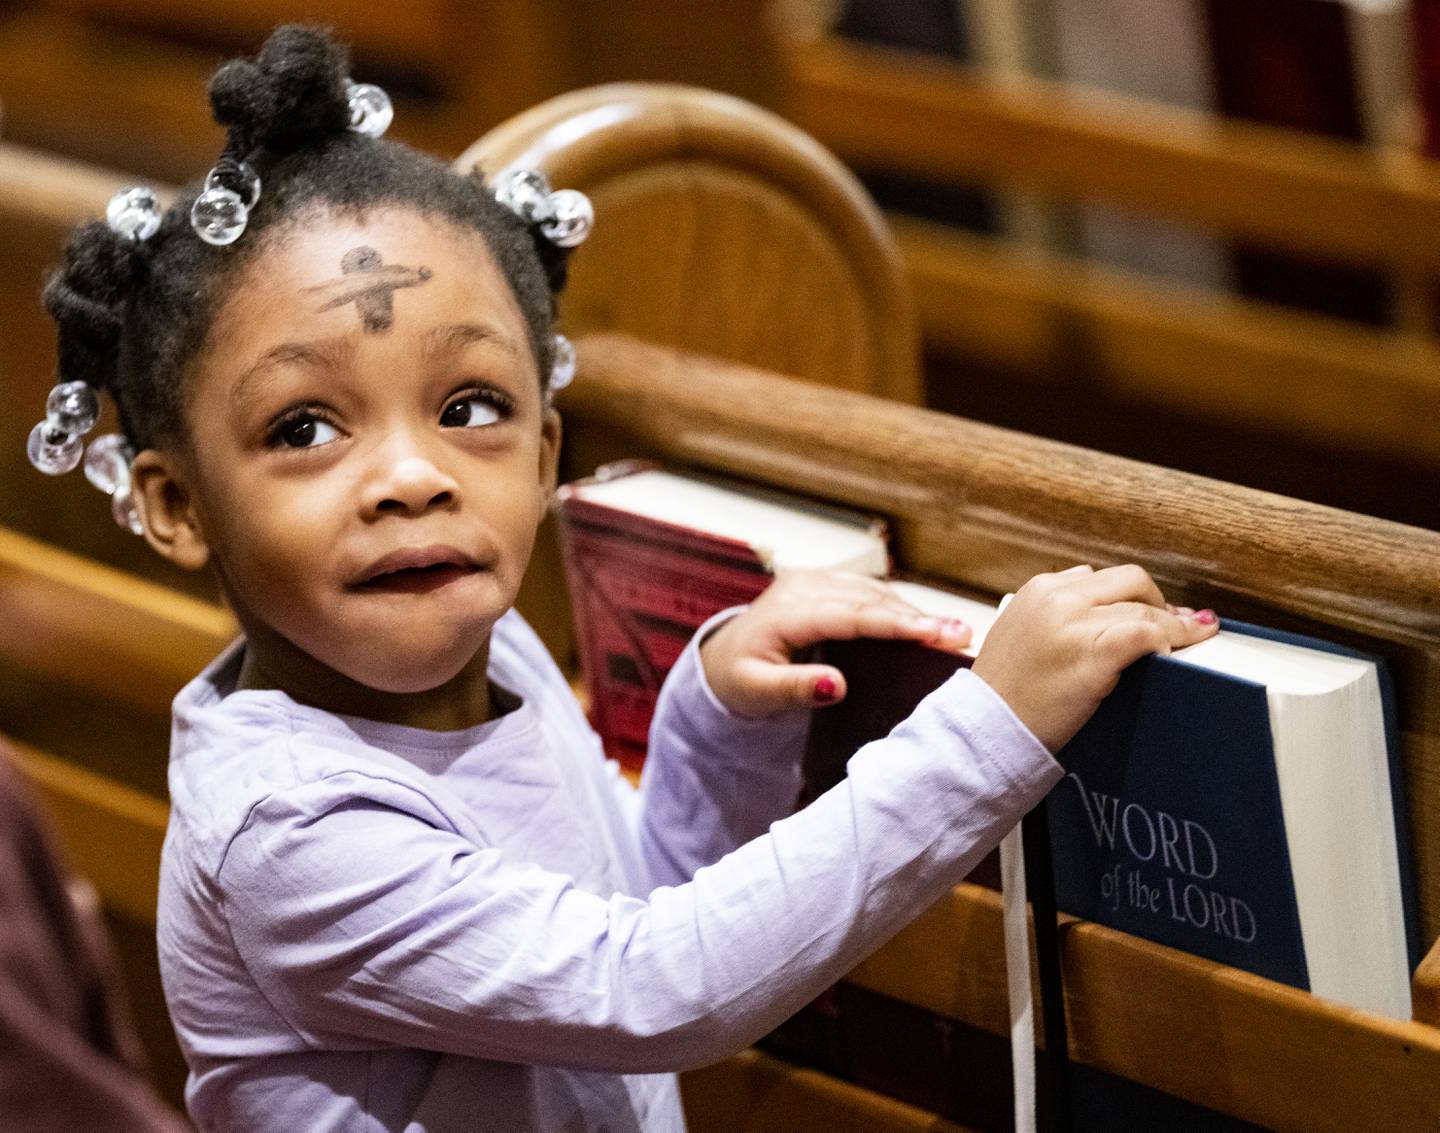 Lenno Bridgeforth, of Baltimore, looks through the pews at St. Francis Xavier Church during Ash Wednesday Mass, in Baltimore, Wednesday, February 22, 2023.